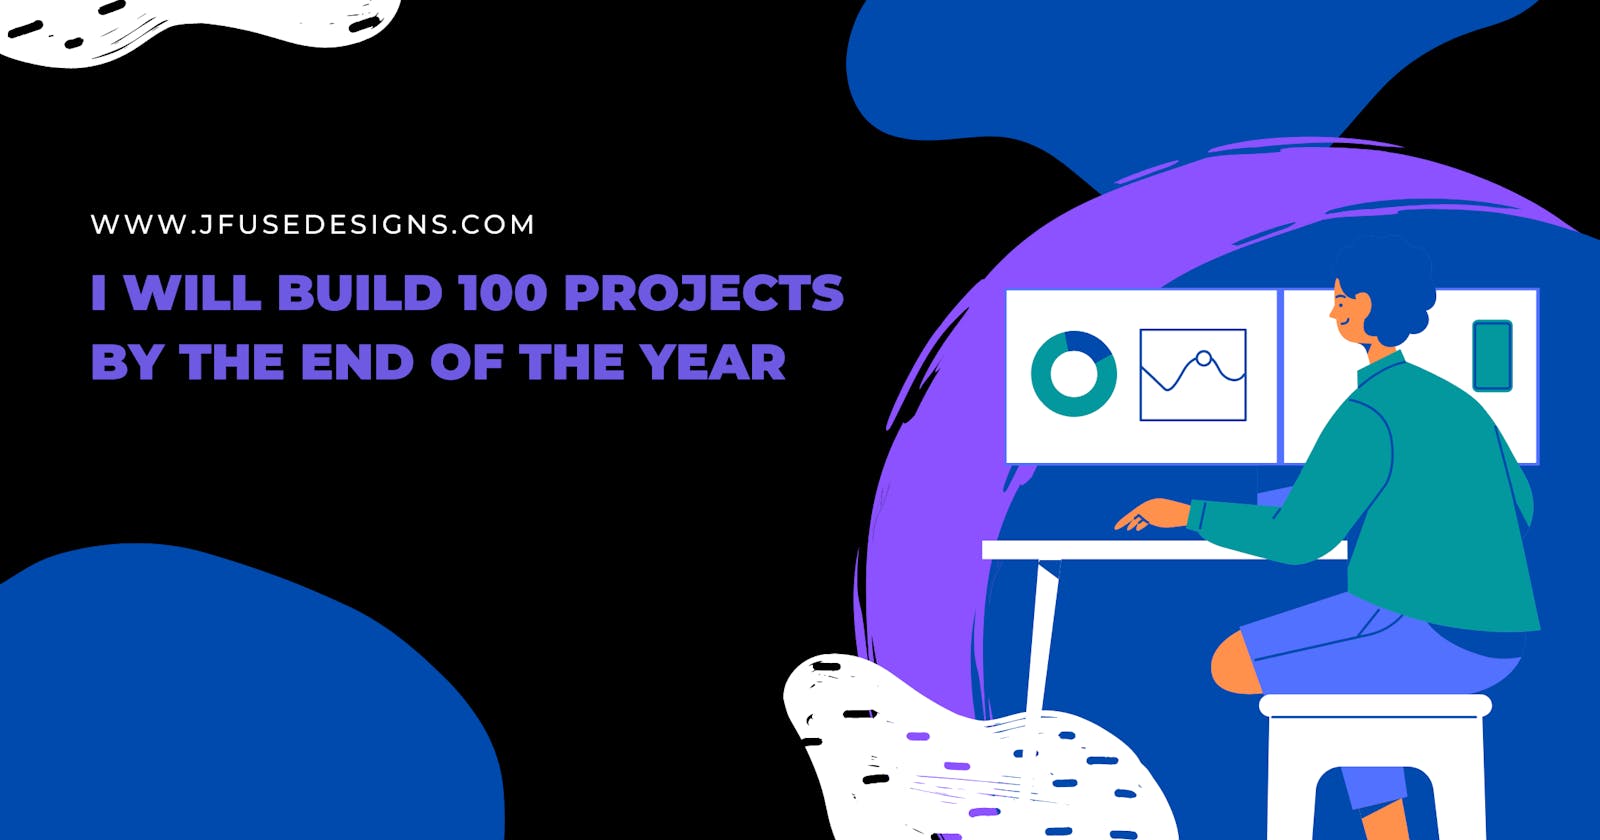 I Will Build 100 Projects by the End of the Year